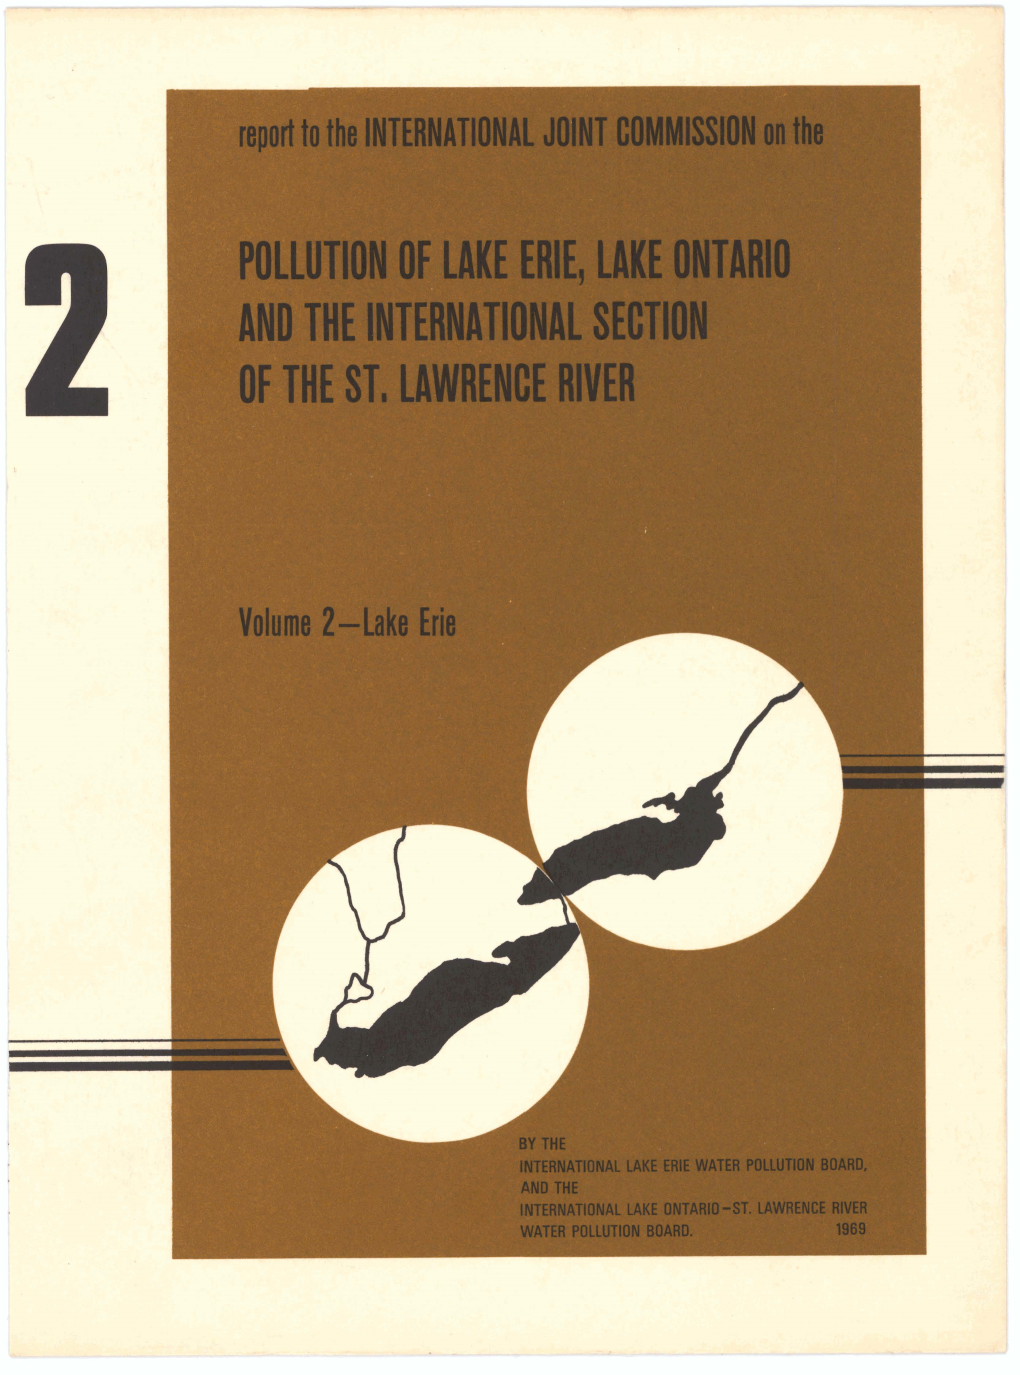 1960. Phytoplankton Communities of Western Lake Erie - and the C02 and 02 Changes Associated with Them